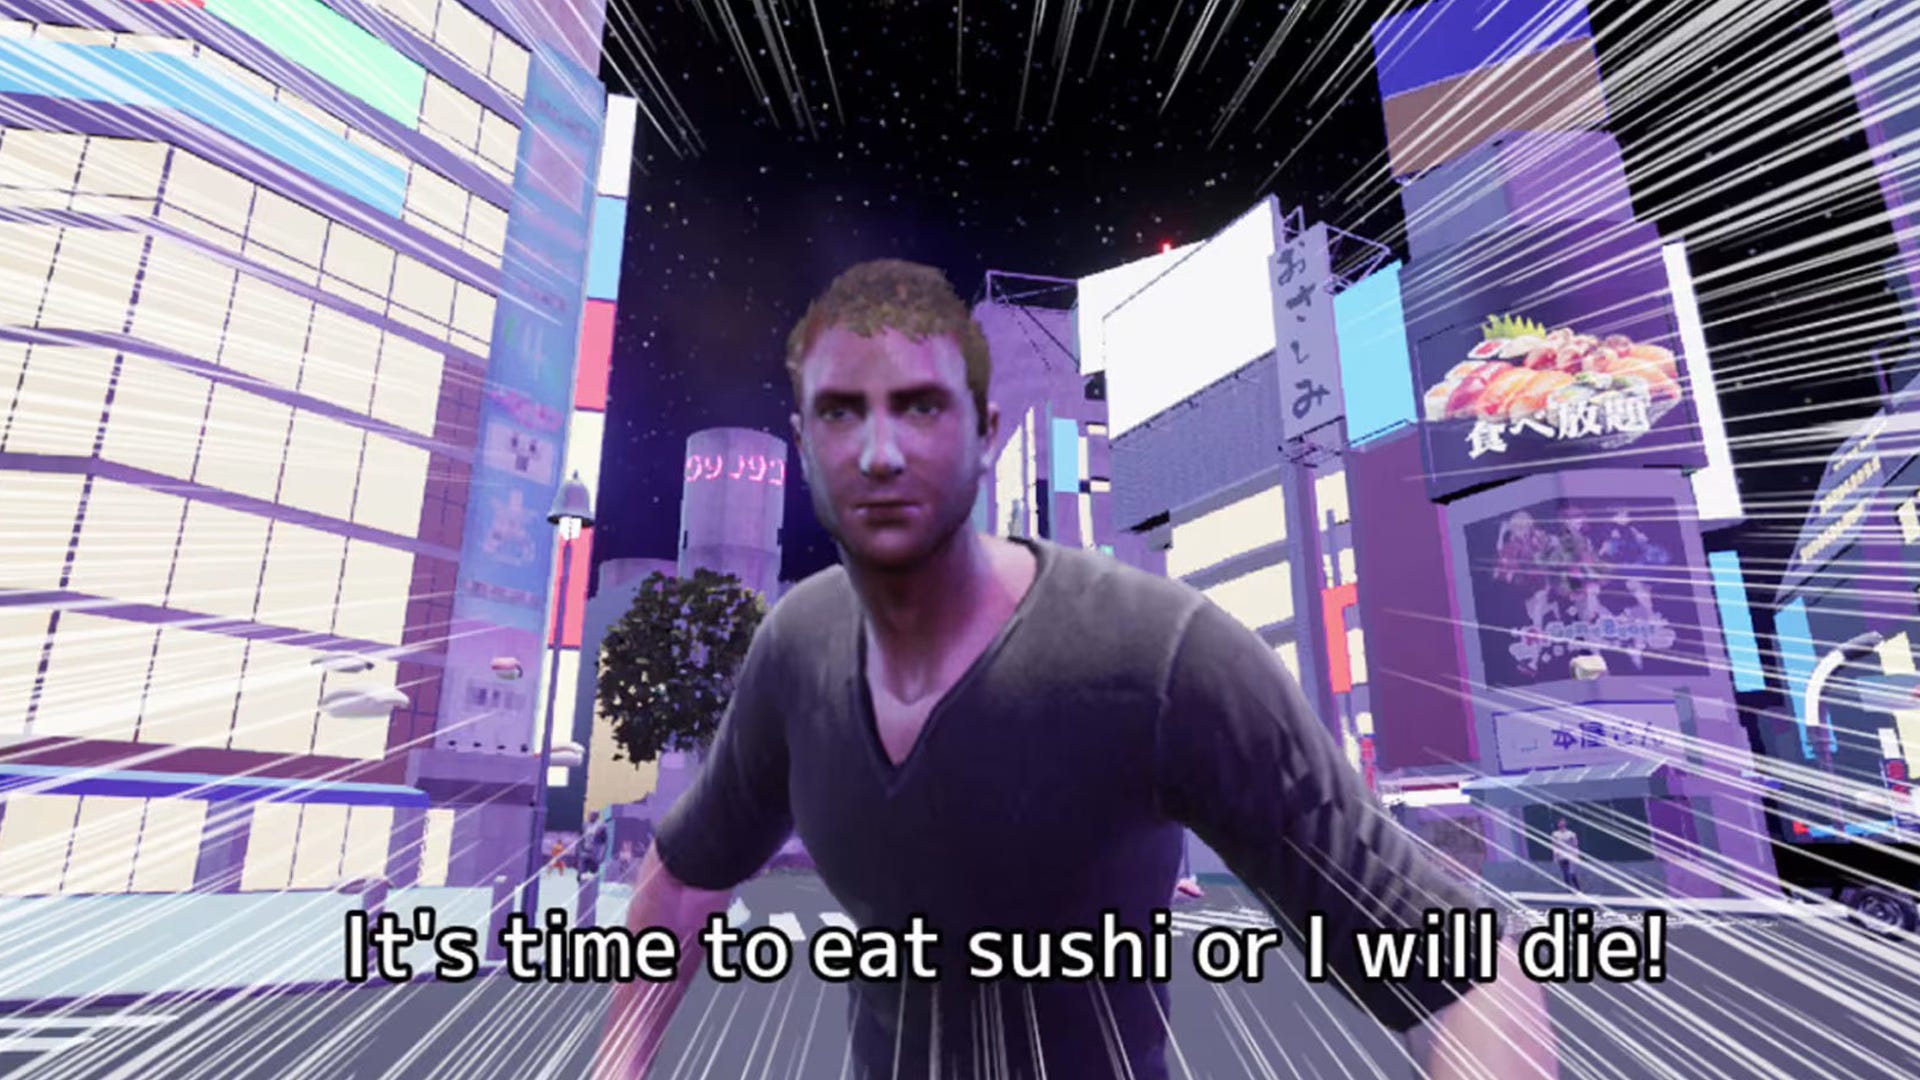 I am obsessed with this new Nintendo Switch game where you are a man who will die if he doesn’t eat sushi